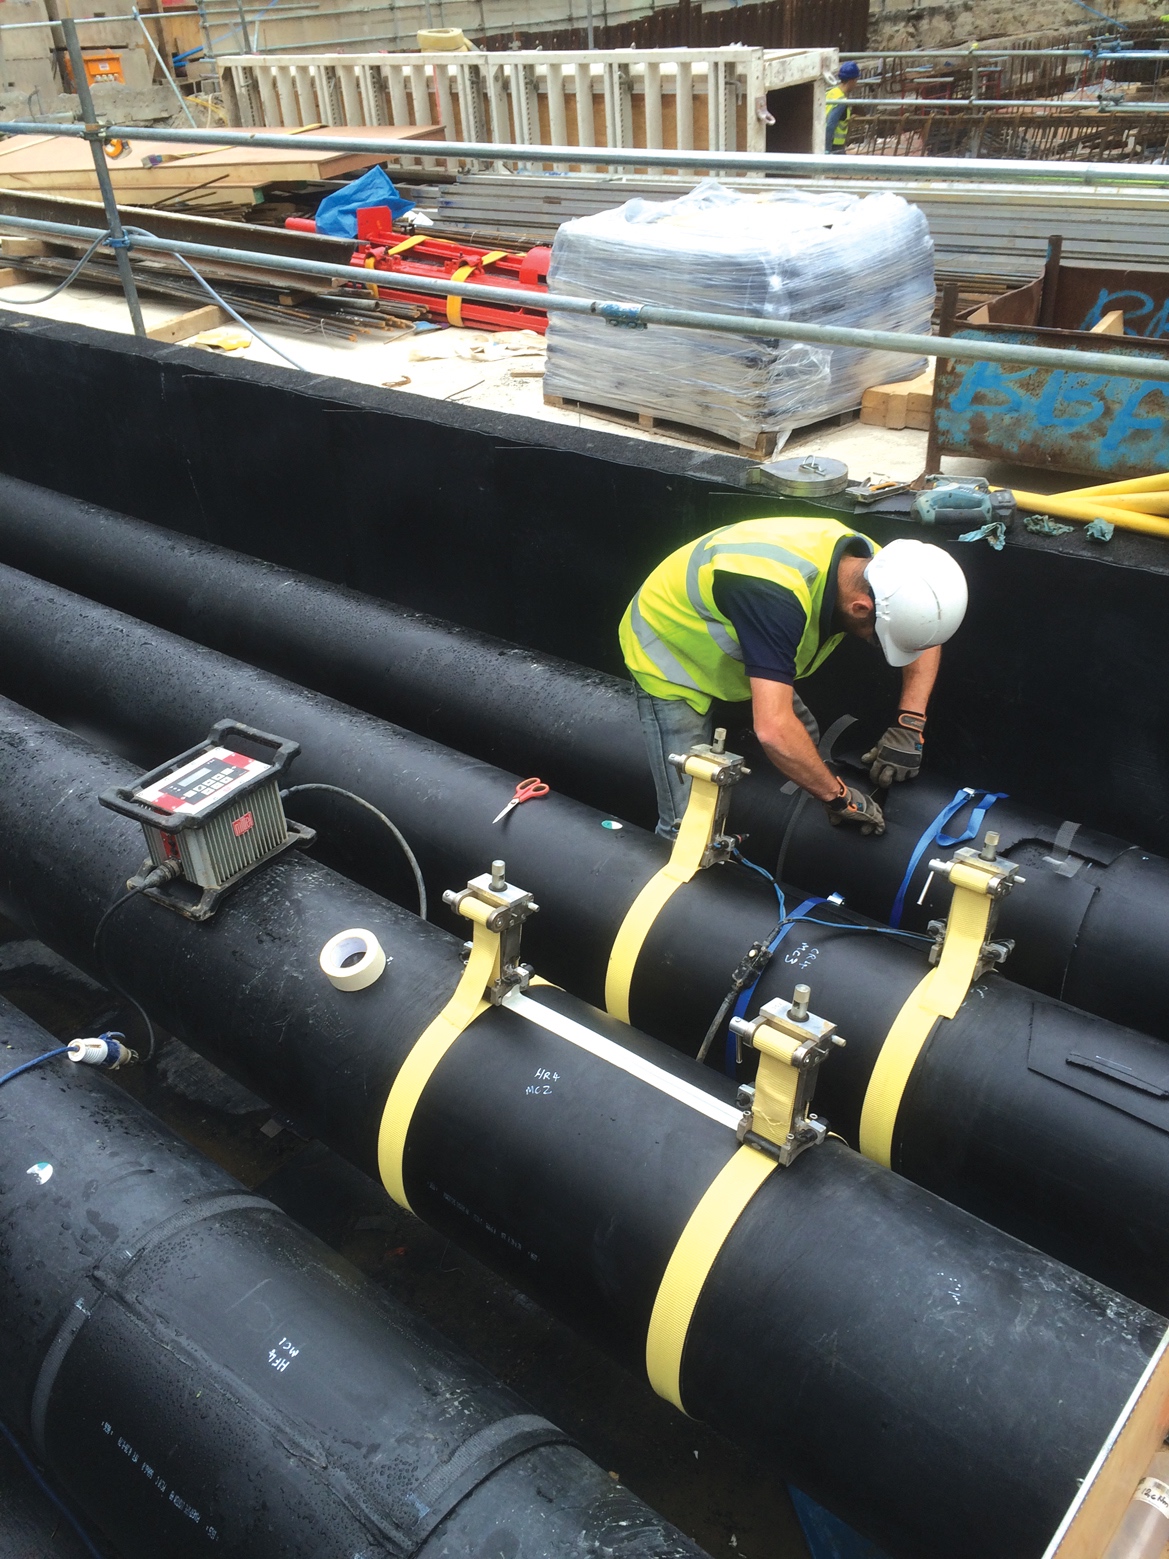 Heat network pipework: Burying an investment, not a problem